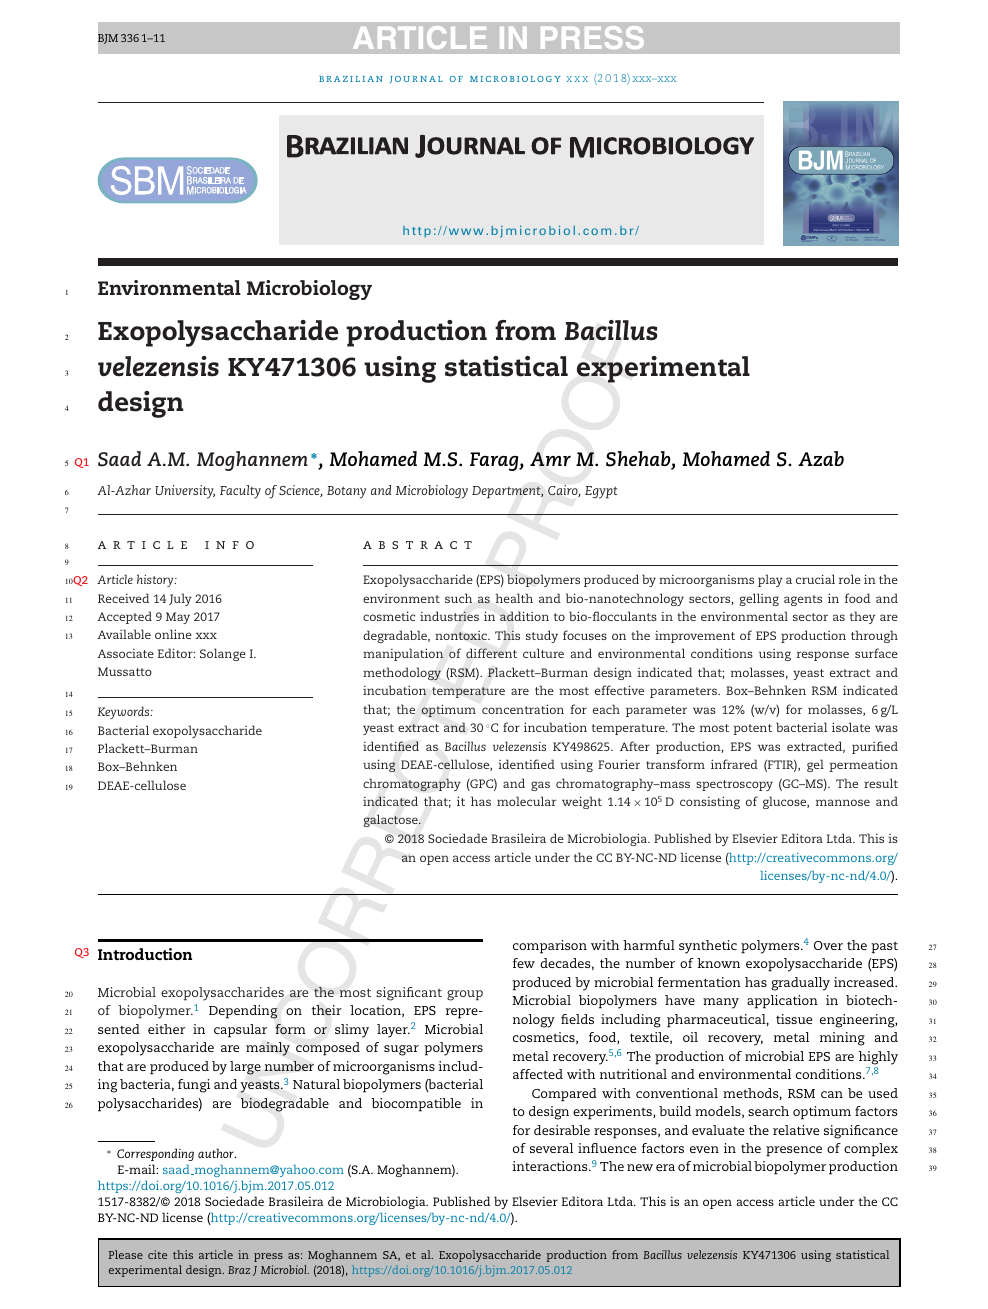 Exopolysaccharide Production From Bacillus Velezensis Ky471306 Using Statistical Experimental Design Topic Of Research Paper In Chemical Sciences Download Scholarly Article Pdf And Read For Free On Cyberleninka Open Science Hub